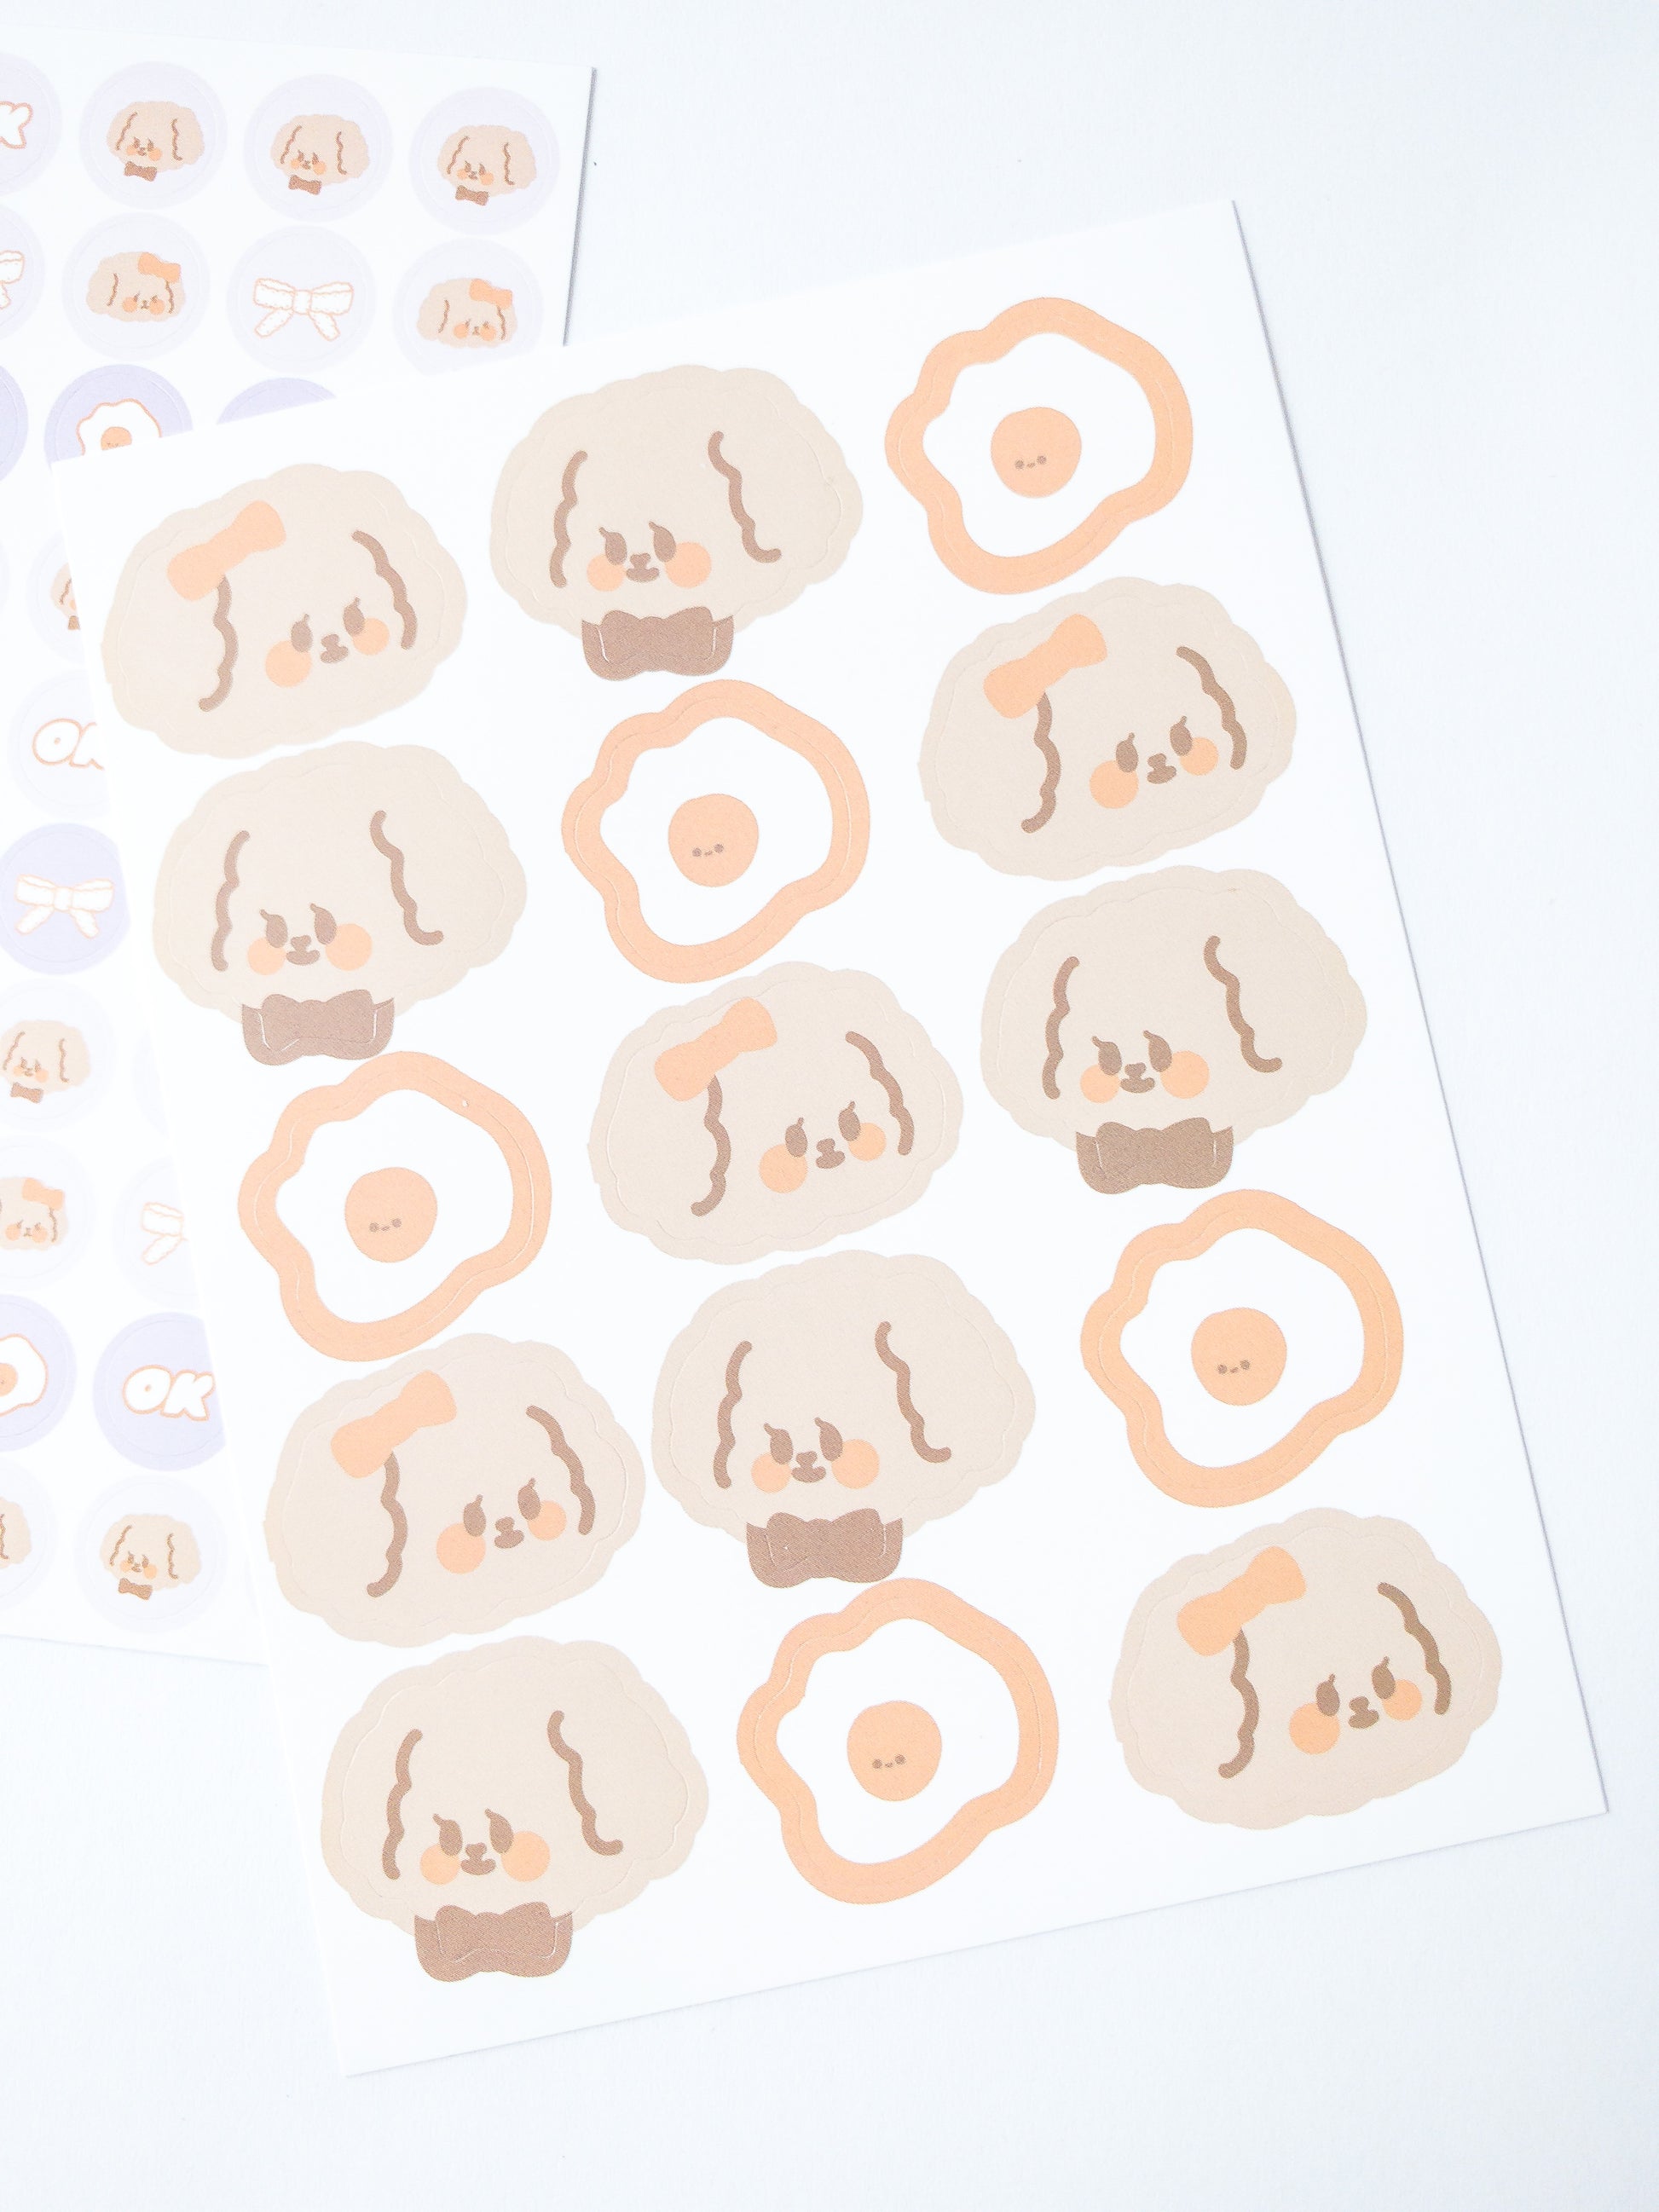 120 Korean style stickers! Three sheets of cute fluffy girl and boy puppies and fried eggs and more. There are 70 mini stickers, 35 medium-sized stickers and 15 large stickers.